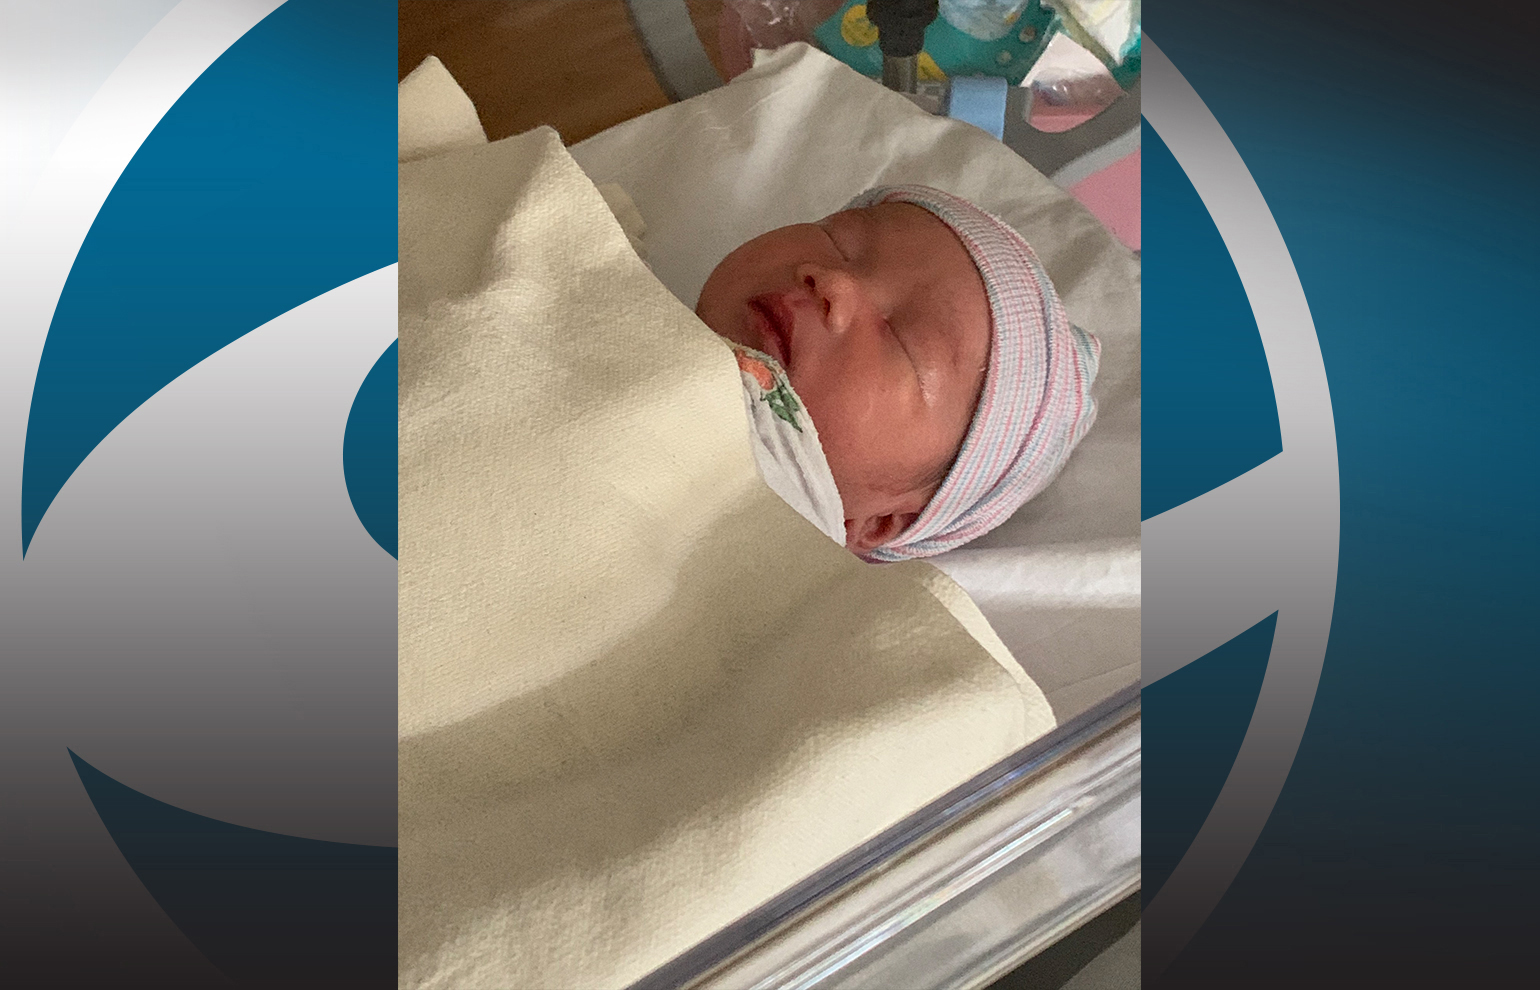 Kenzie Lucas Yuan was born at 4:32 a.m. on New Year's Day, weighed 6 pounds, 8 ounces and was 20 inches long.